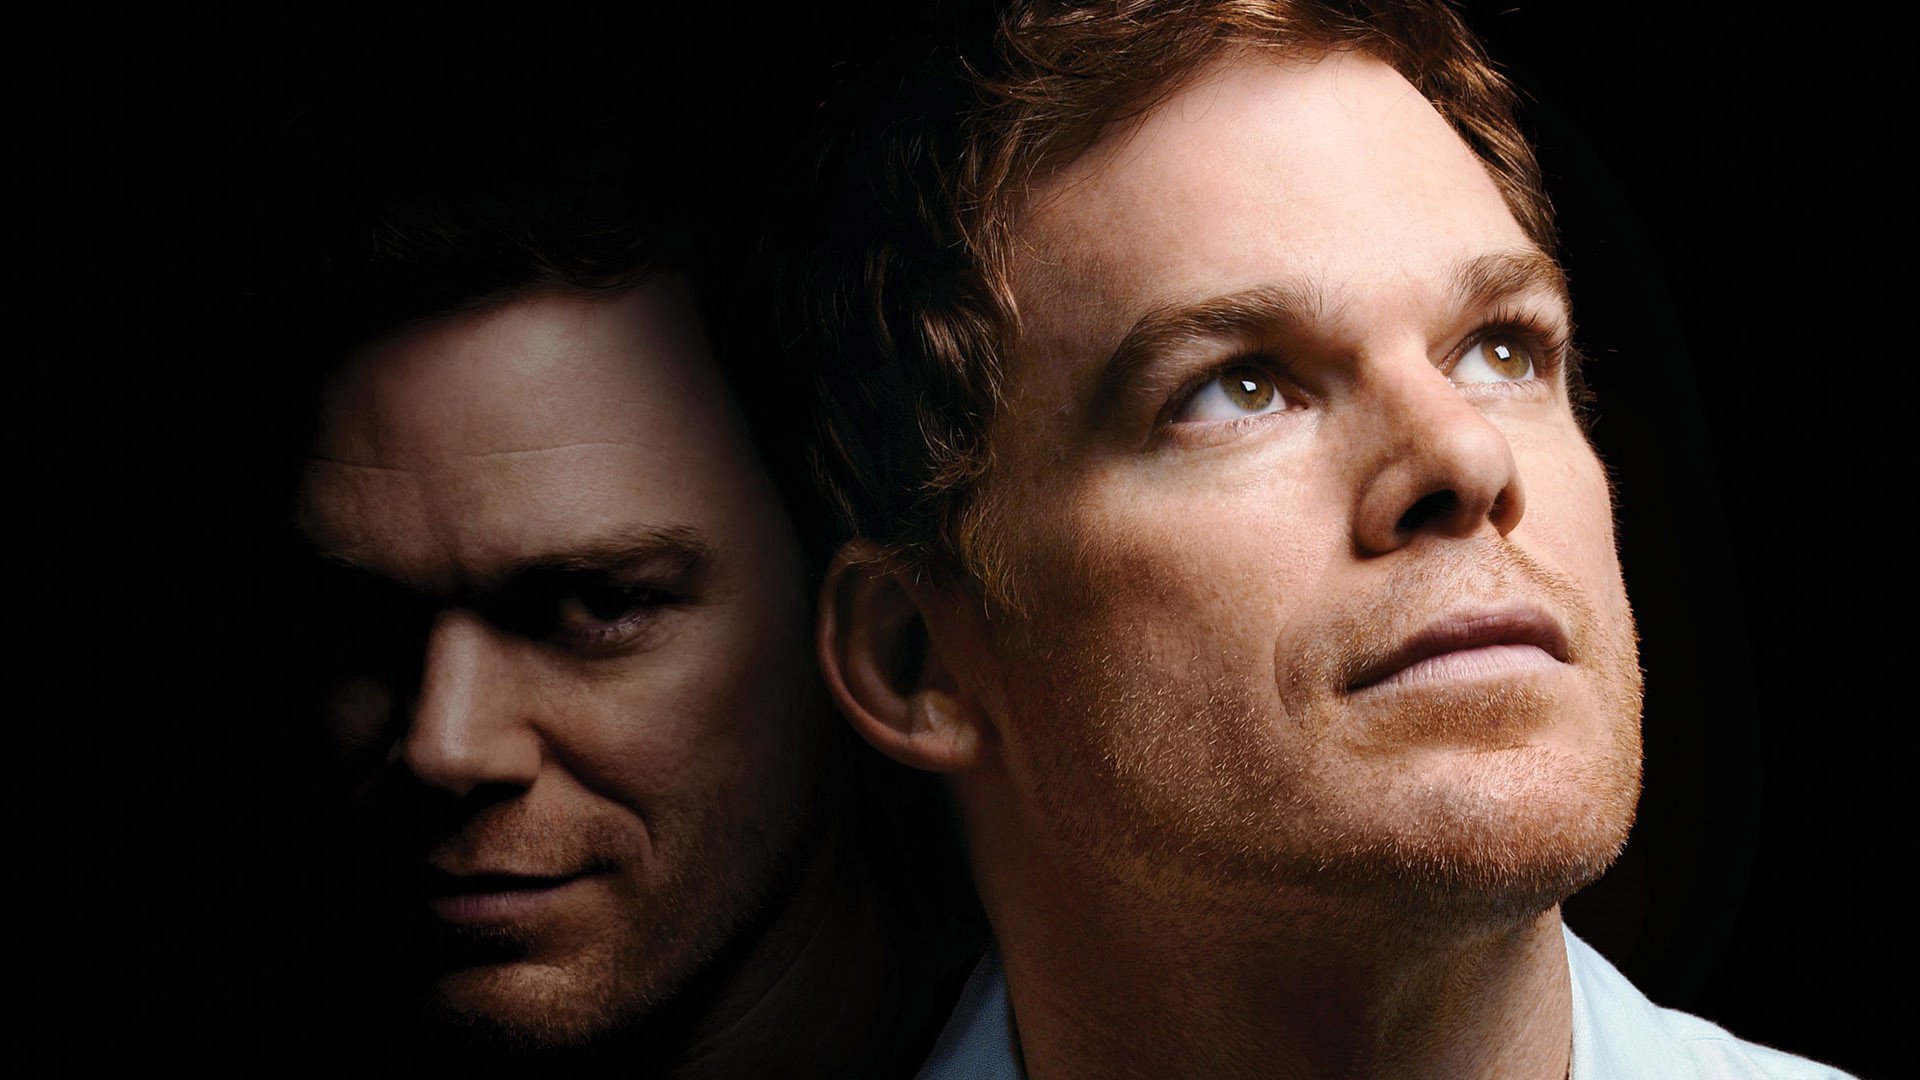 Free Dexter high quality wallpaper ID:275824 for hd 1920x1080 computer